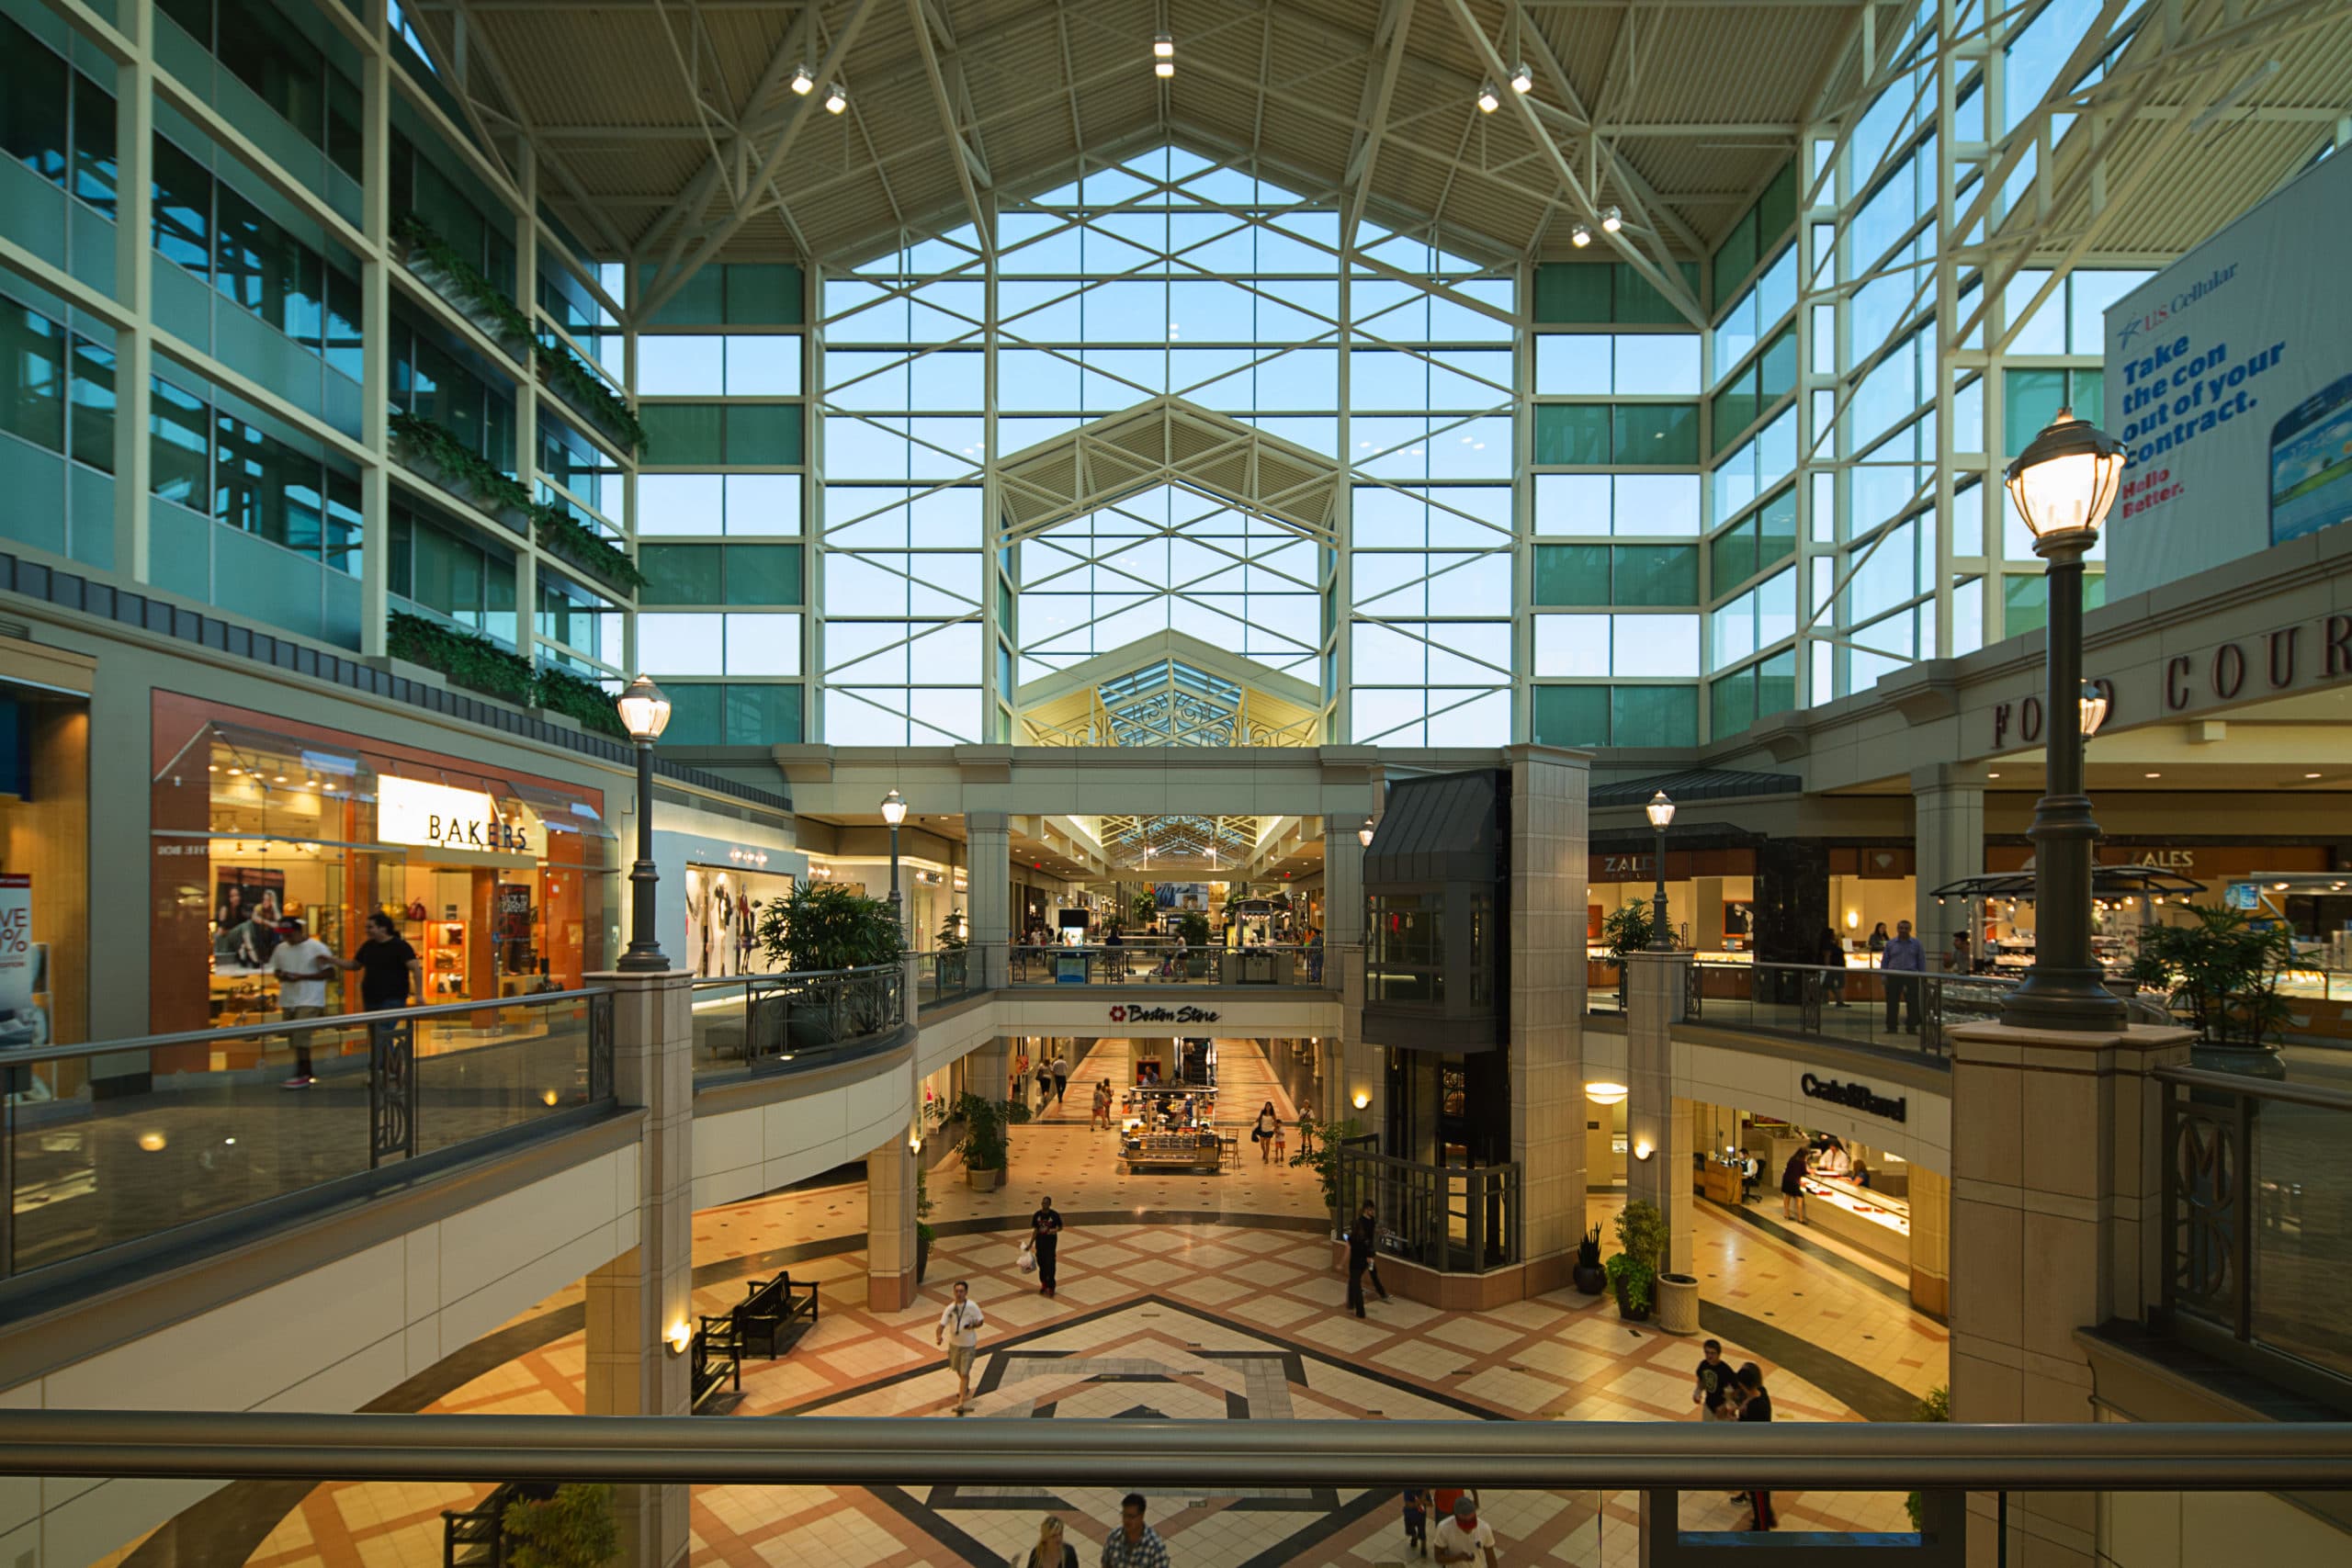 Interior of Mayfair Mall in Wauwatosa, WI